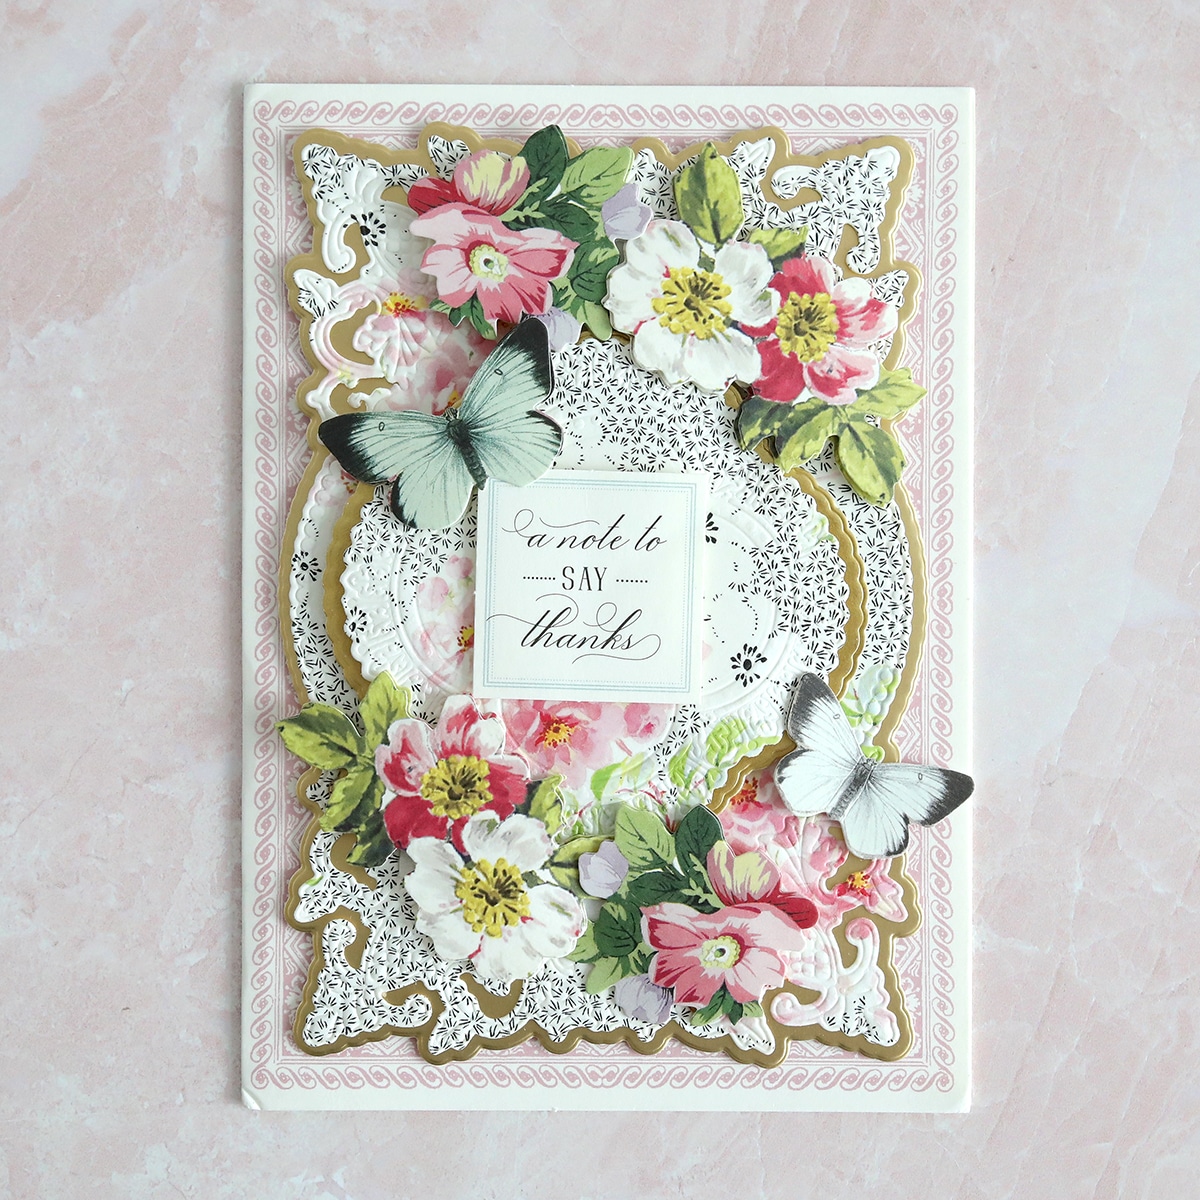 A card with flowers and butterflies on a pink background.